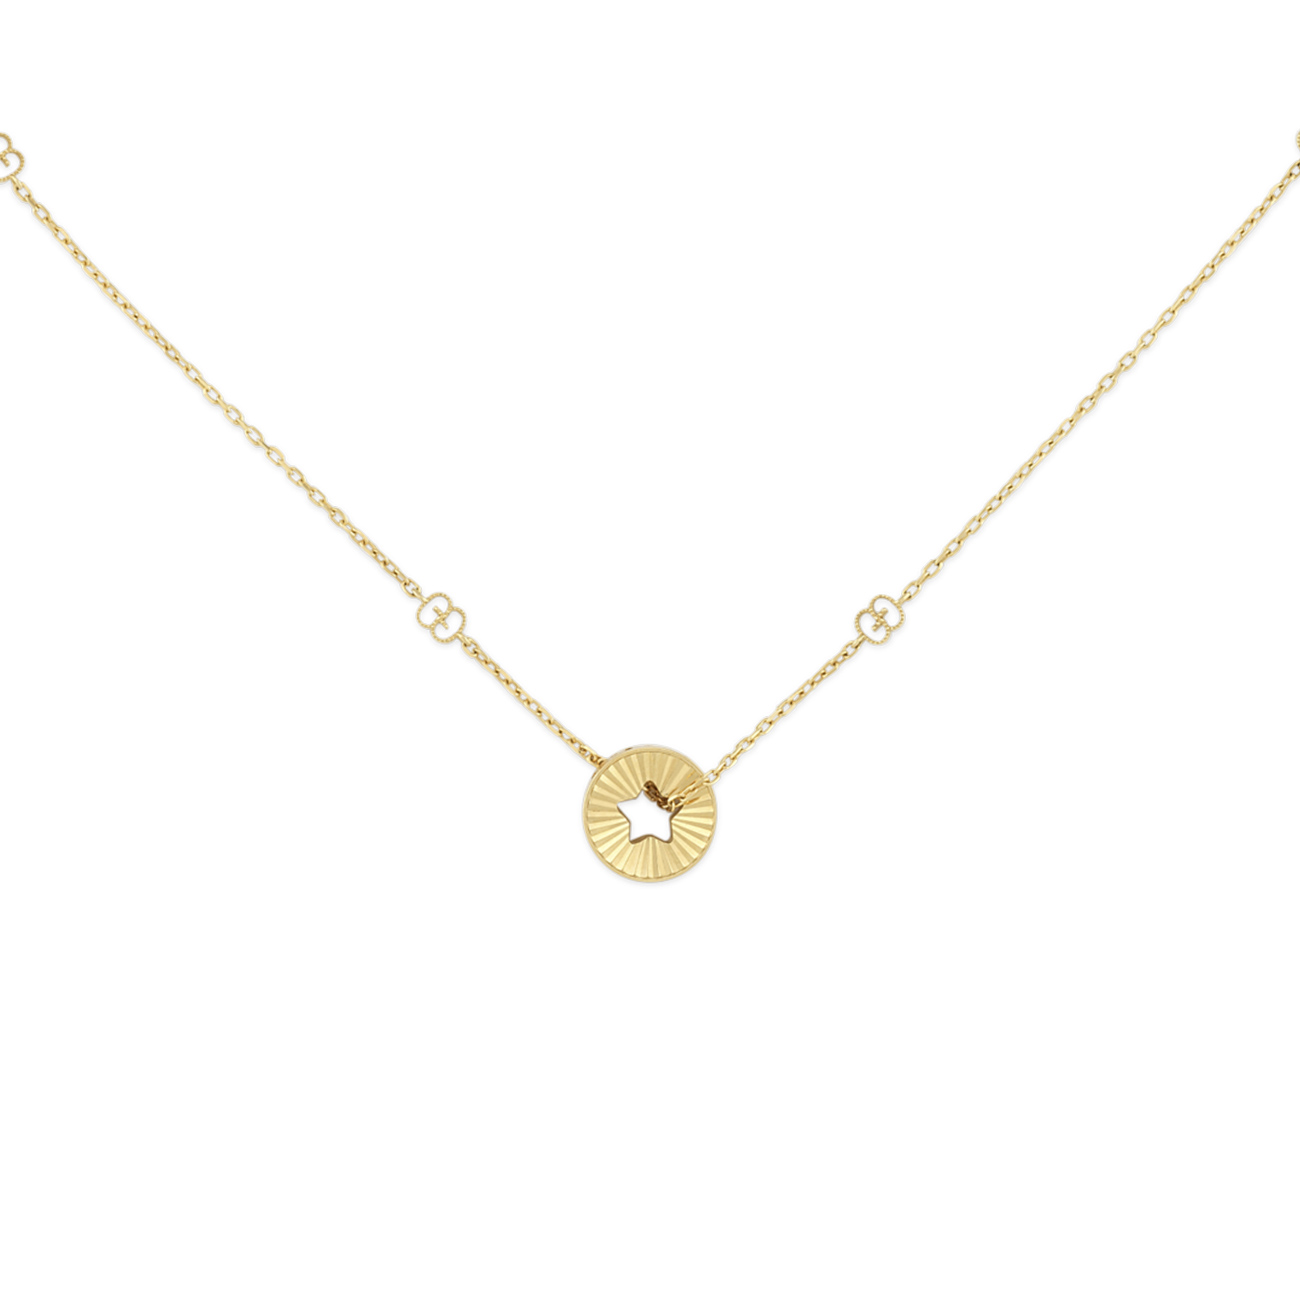 Gucci Icon Star Necklace in 18K Yellow Gold